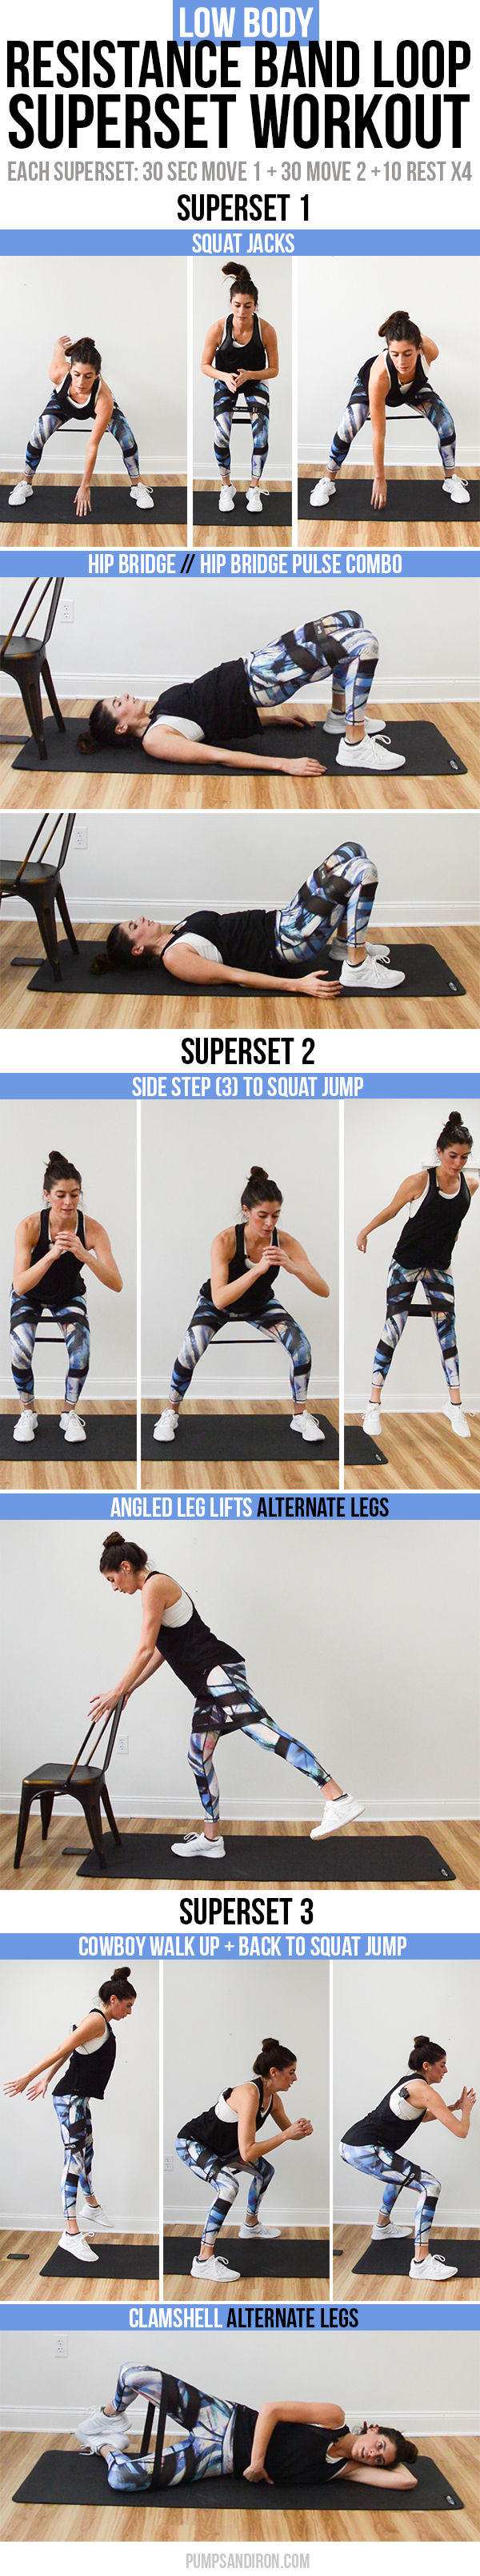 Resistance Band Loop Superset Workout -- focus is on butt & thighs, only 15 minutes long